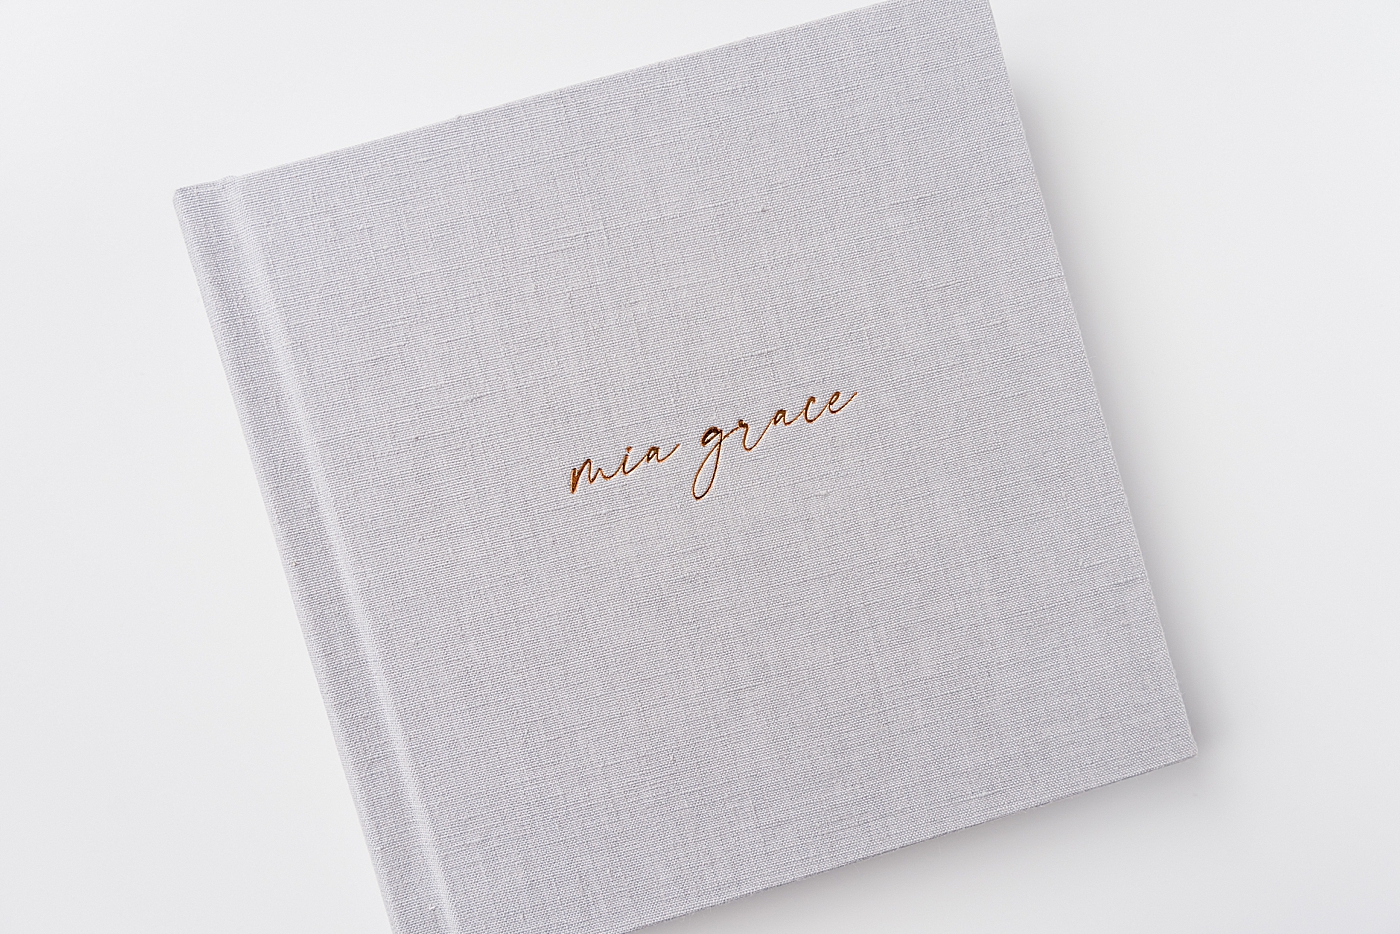 Baby's name on a gray album | Heirloom Albums with Charlotte Newborn Photographer Anna Wisjo 